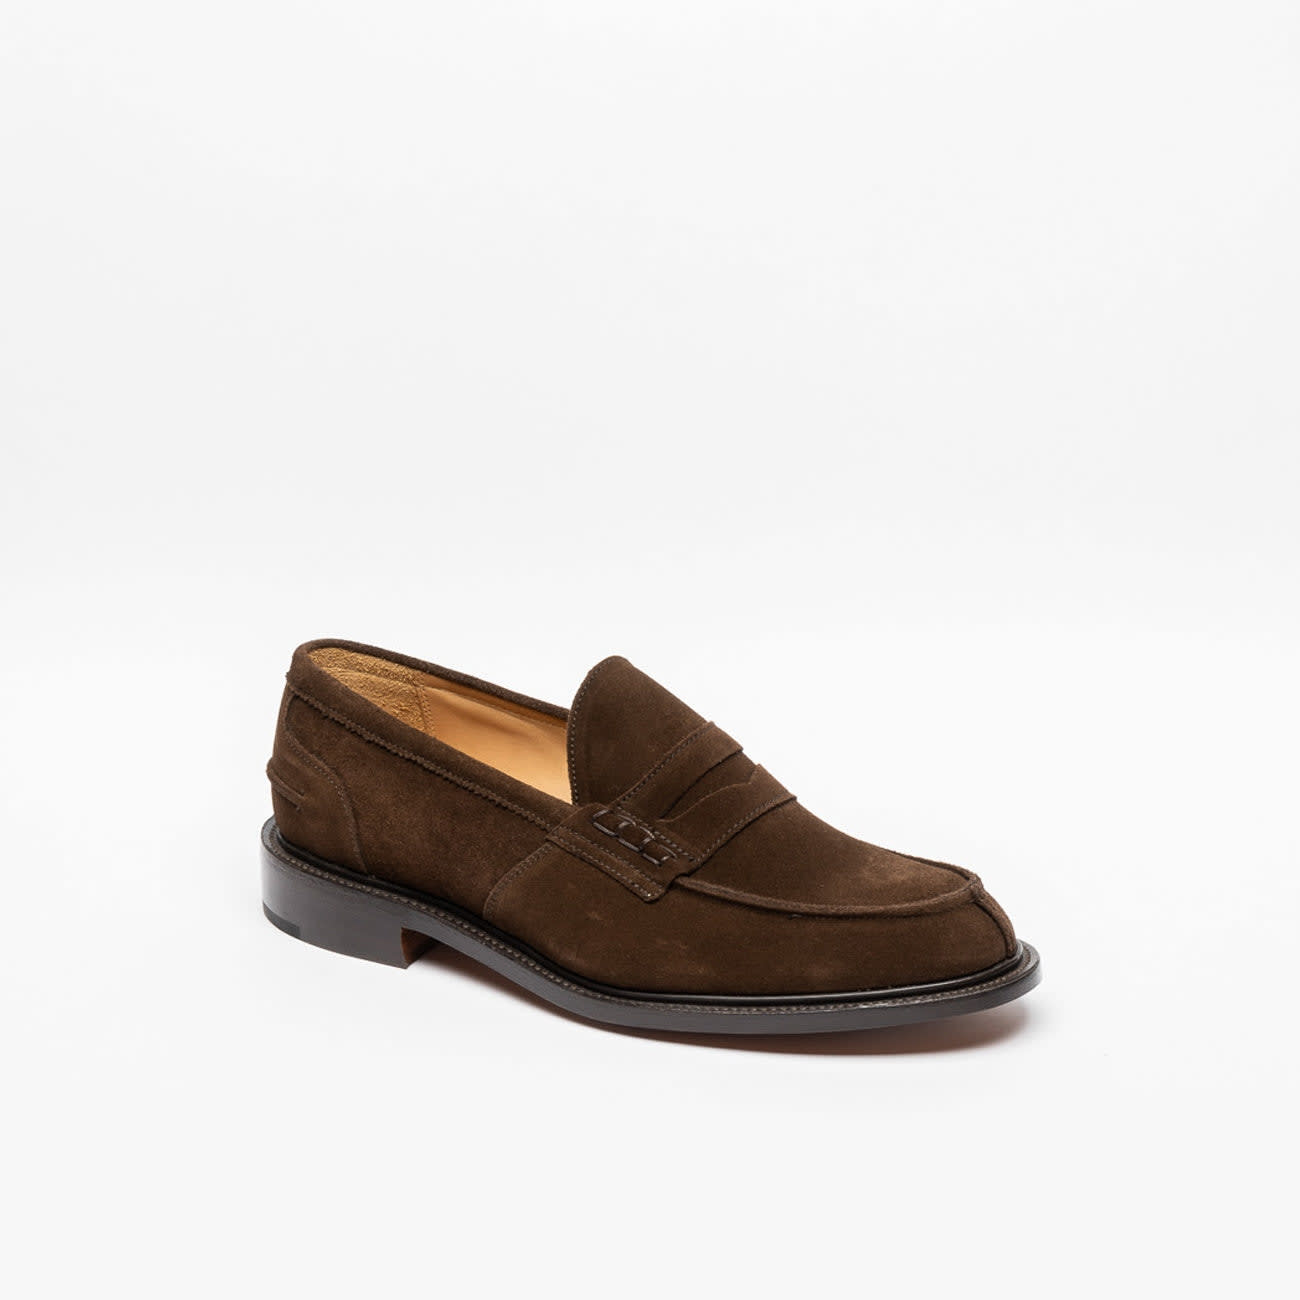 Chocolate Repello Suede Loafer